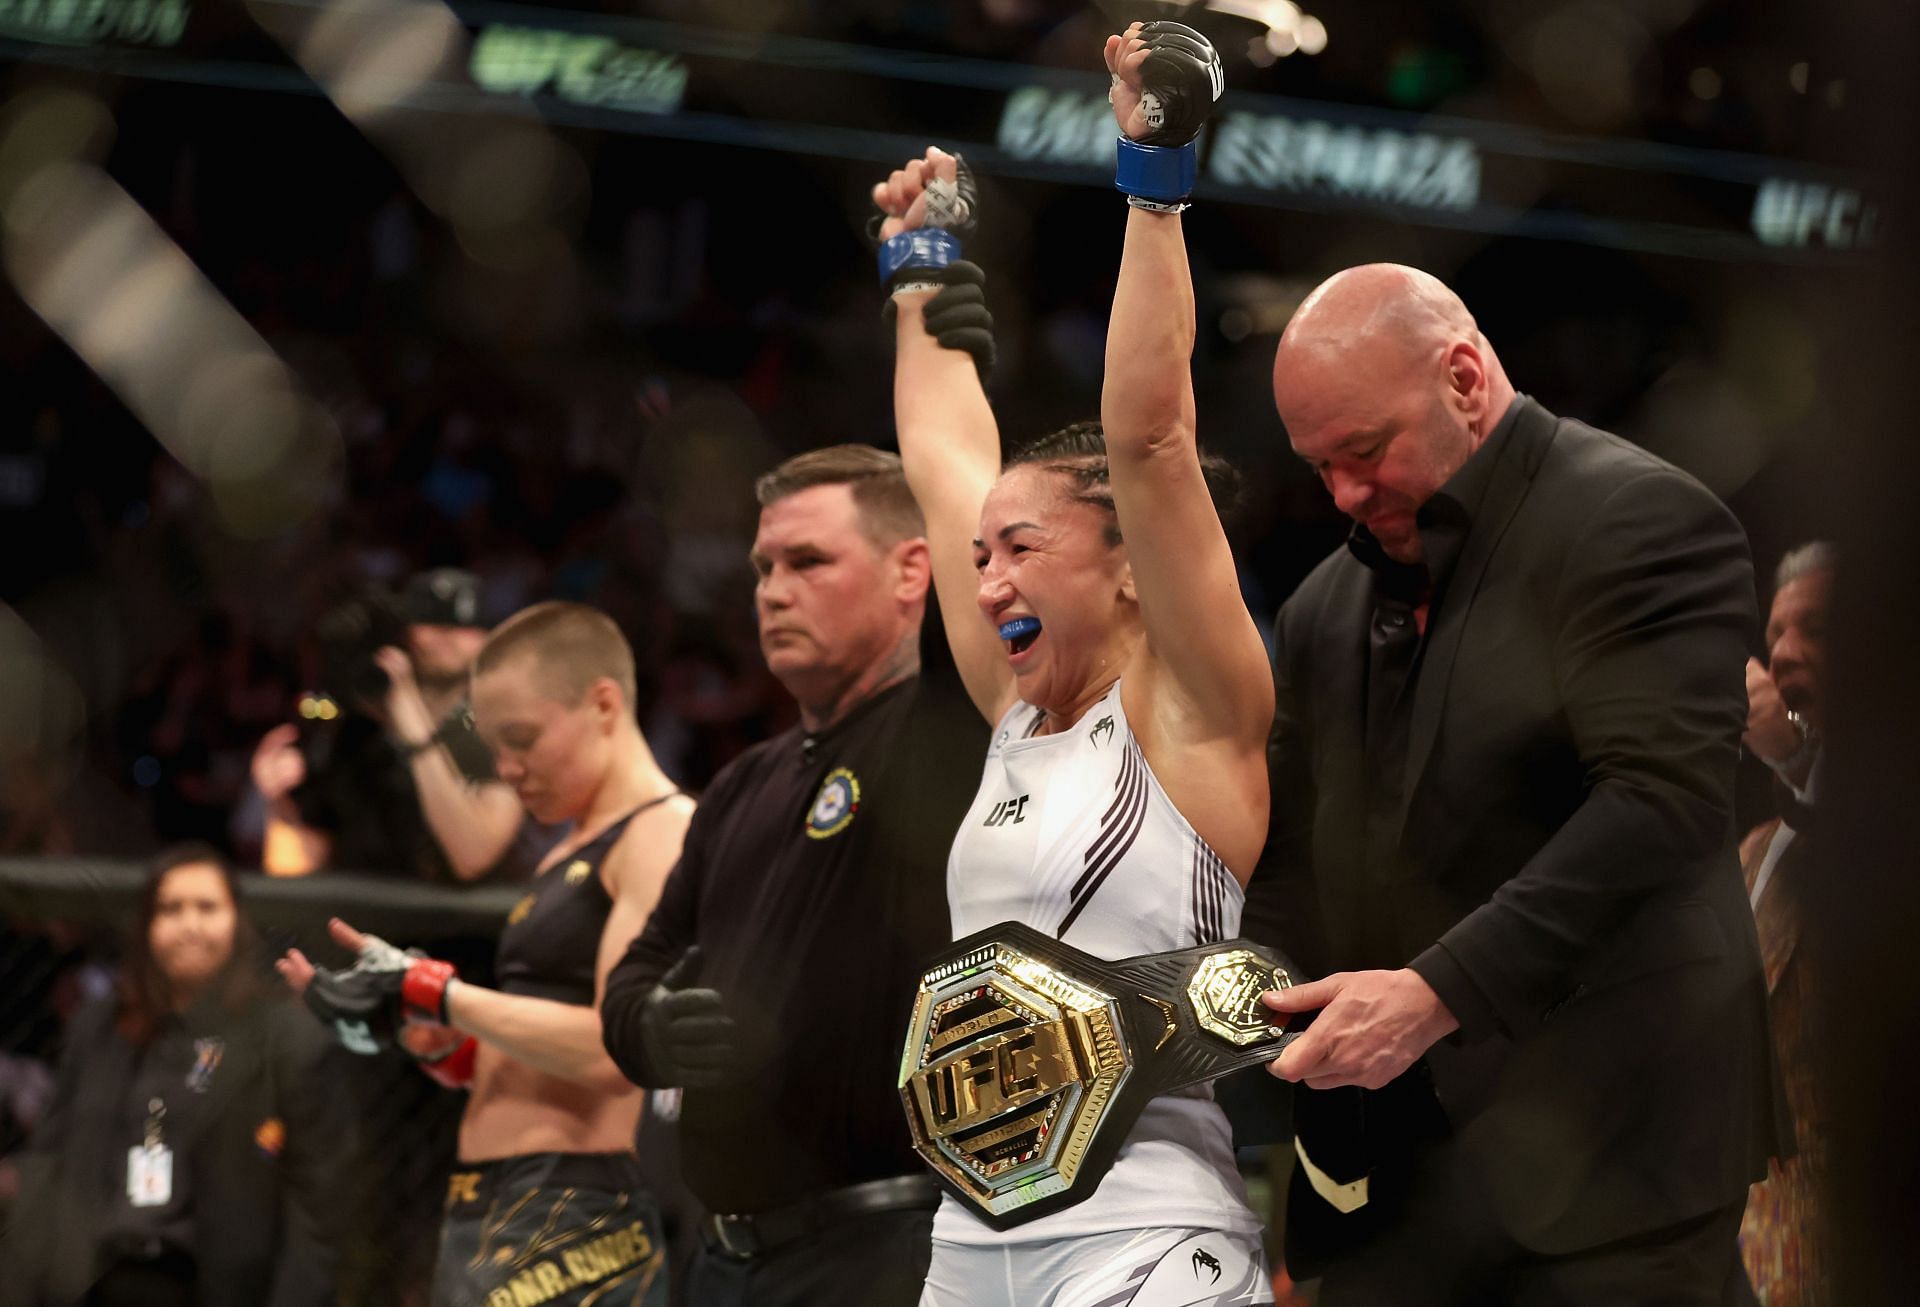 Carla Esparza will be hoping to continue her winning streak when she defends her strawweight title against Weili Zhang